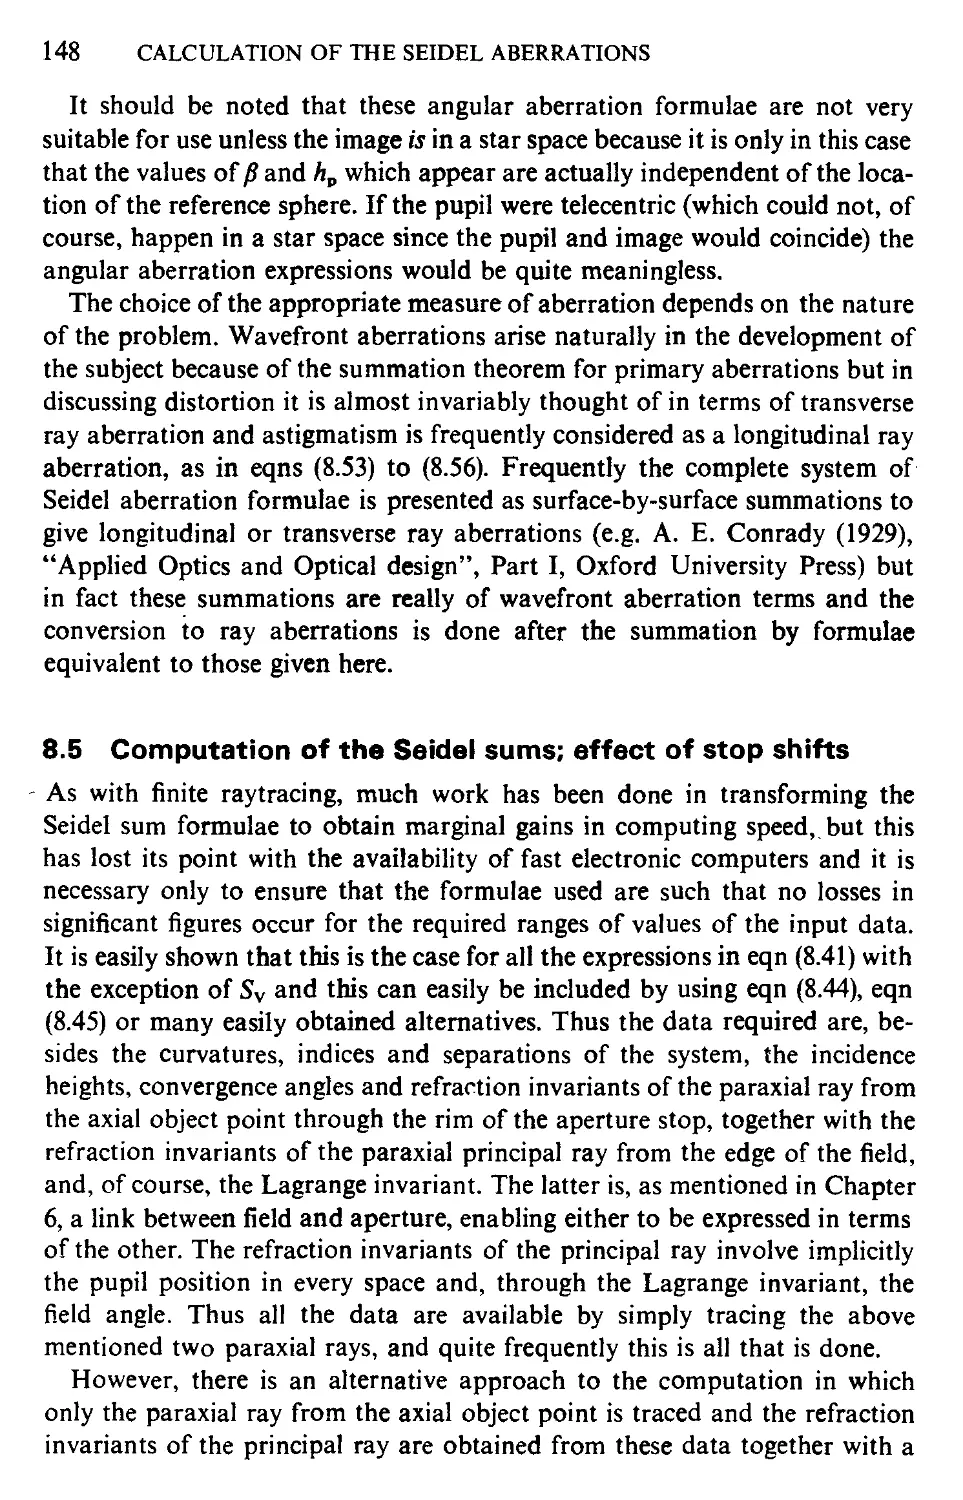 8.5 Computation of the Seidel sums; effect of stop shifts